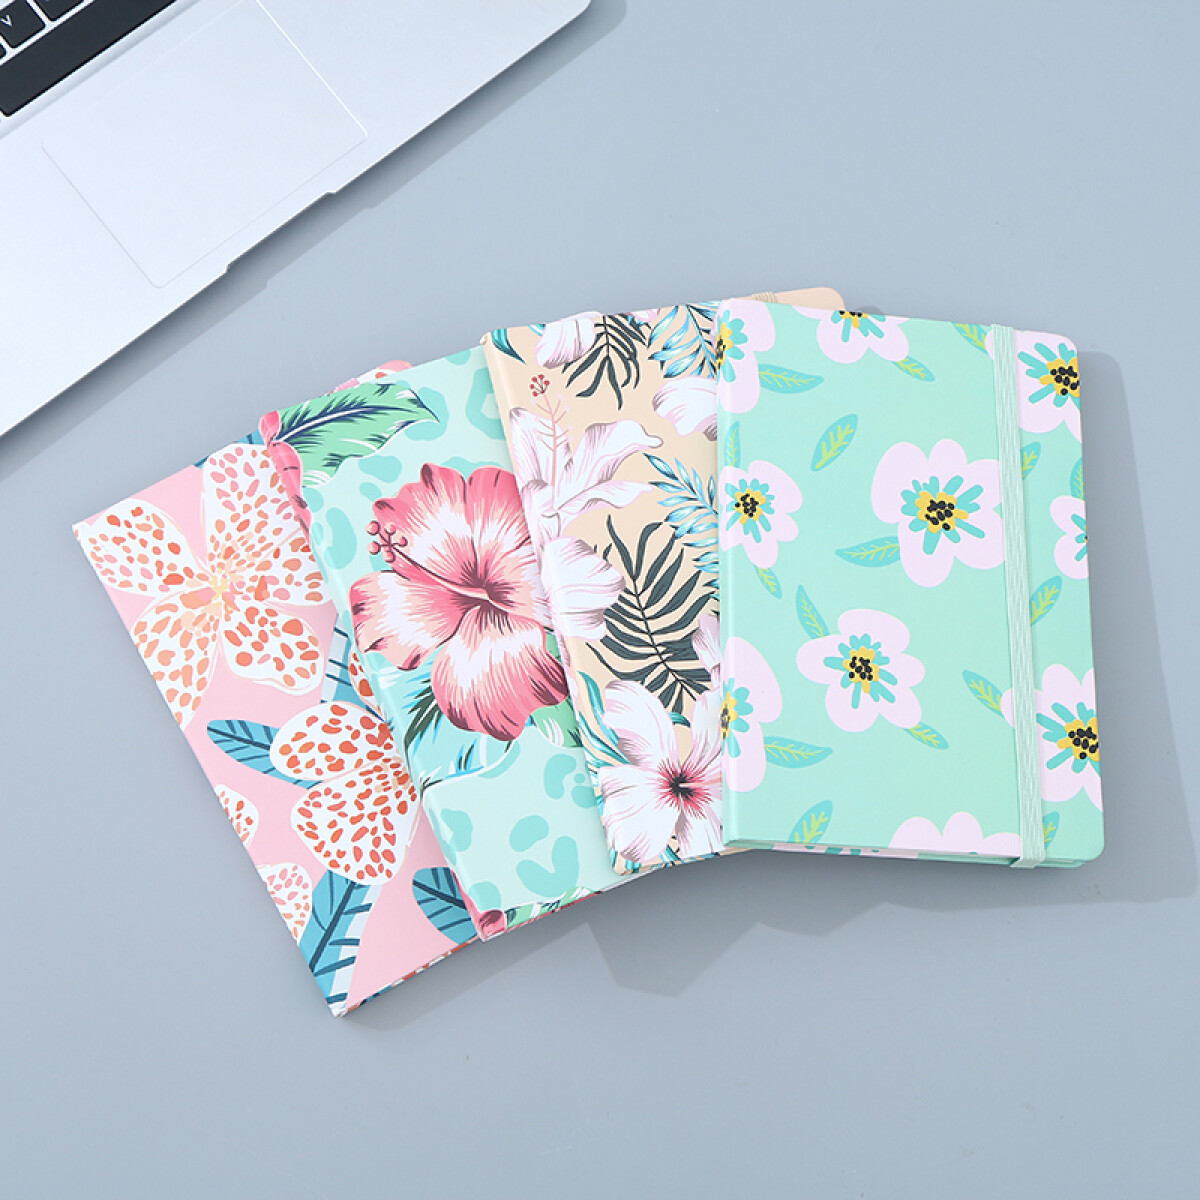 Cuaderno Tapa Dura A5 - Blooming Flowers - 96 Hojas - Unica 